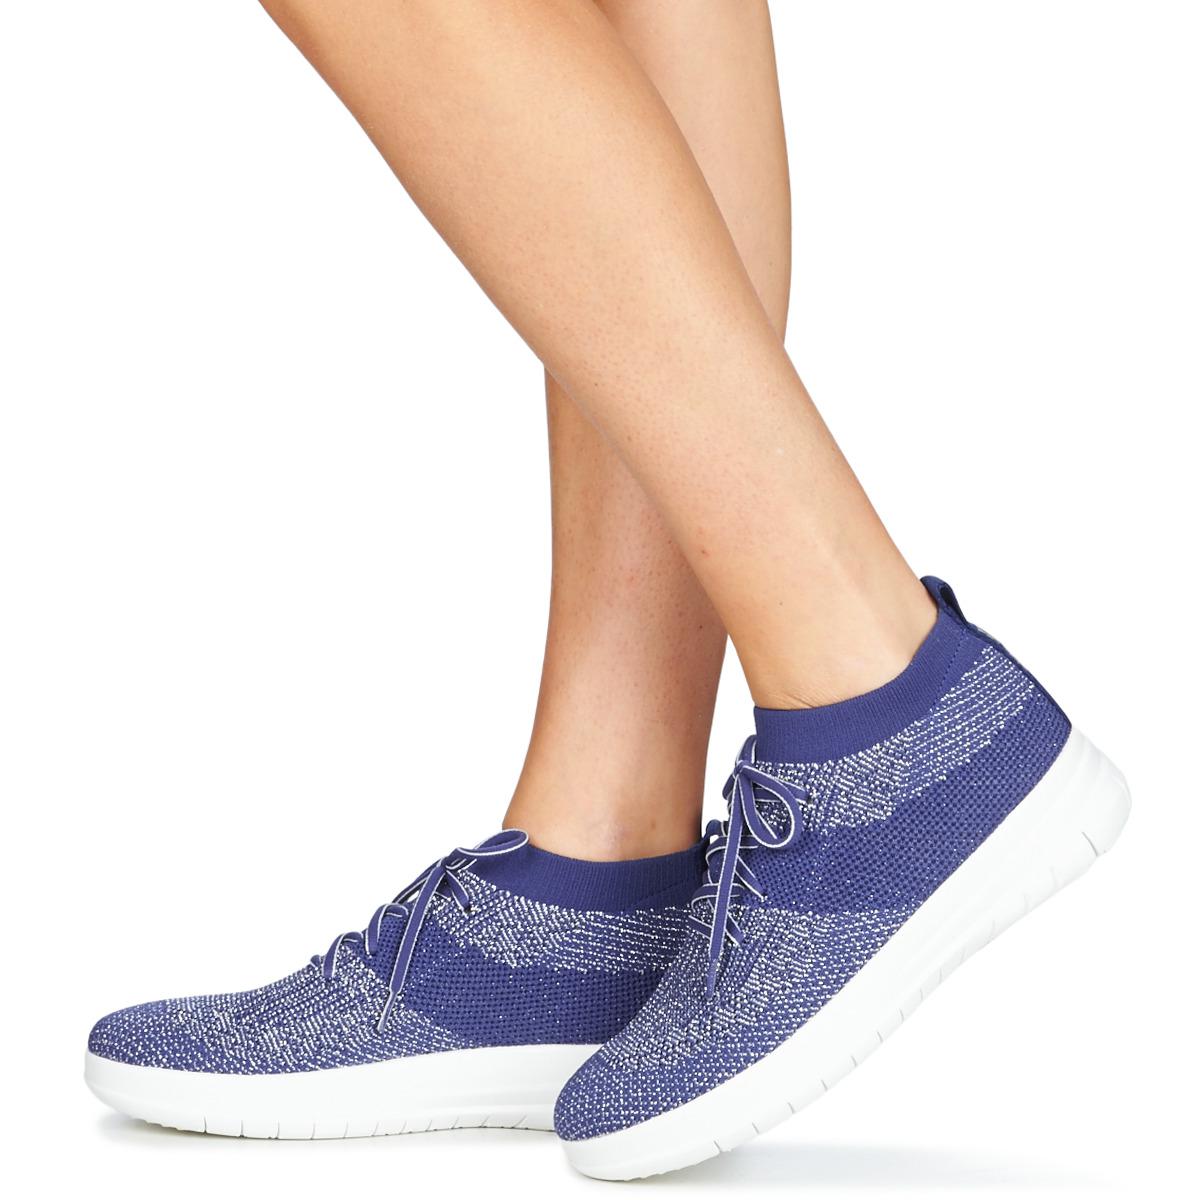 Fitflop Uberknit High Top Top Sellers, SAVE 32% - colaisteanatha.ie